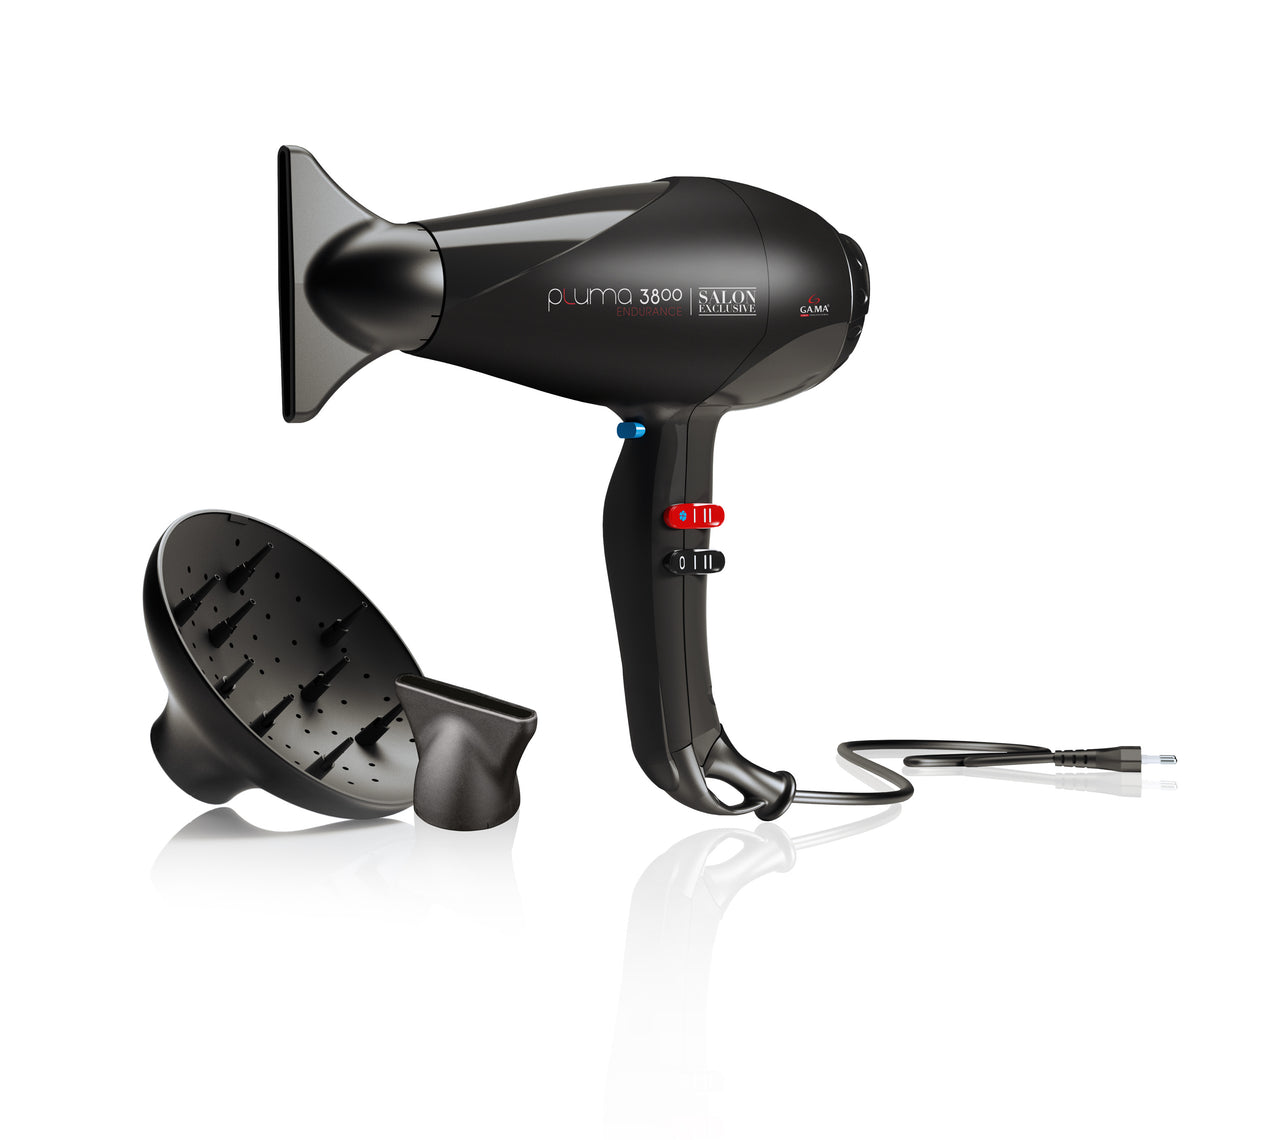 Gama IQ1 Perfetto Hair Dryer (with new filter)